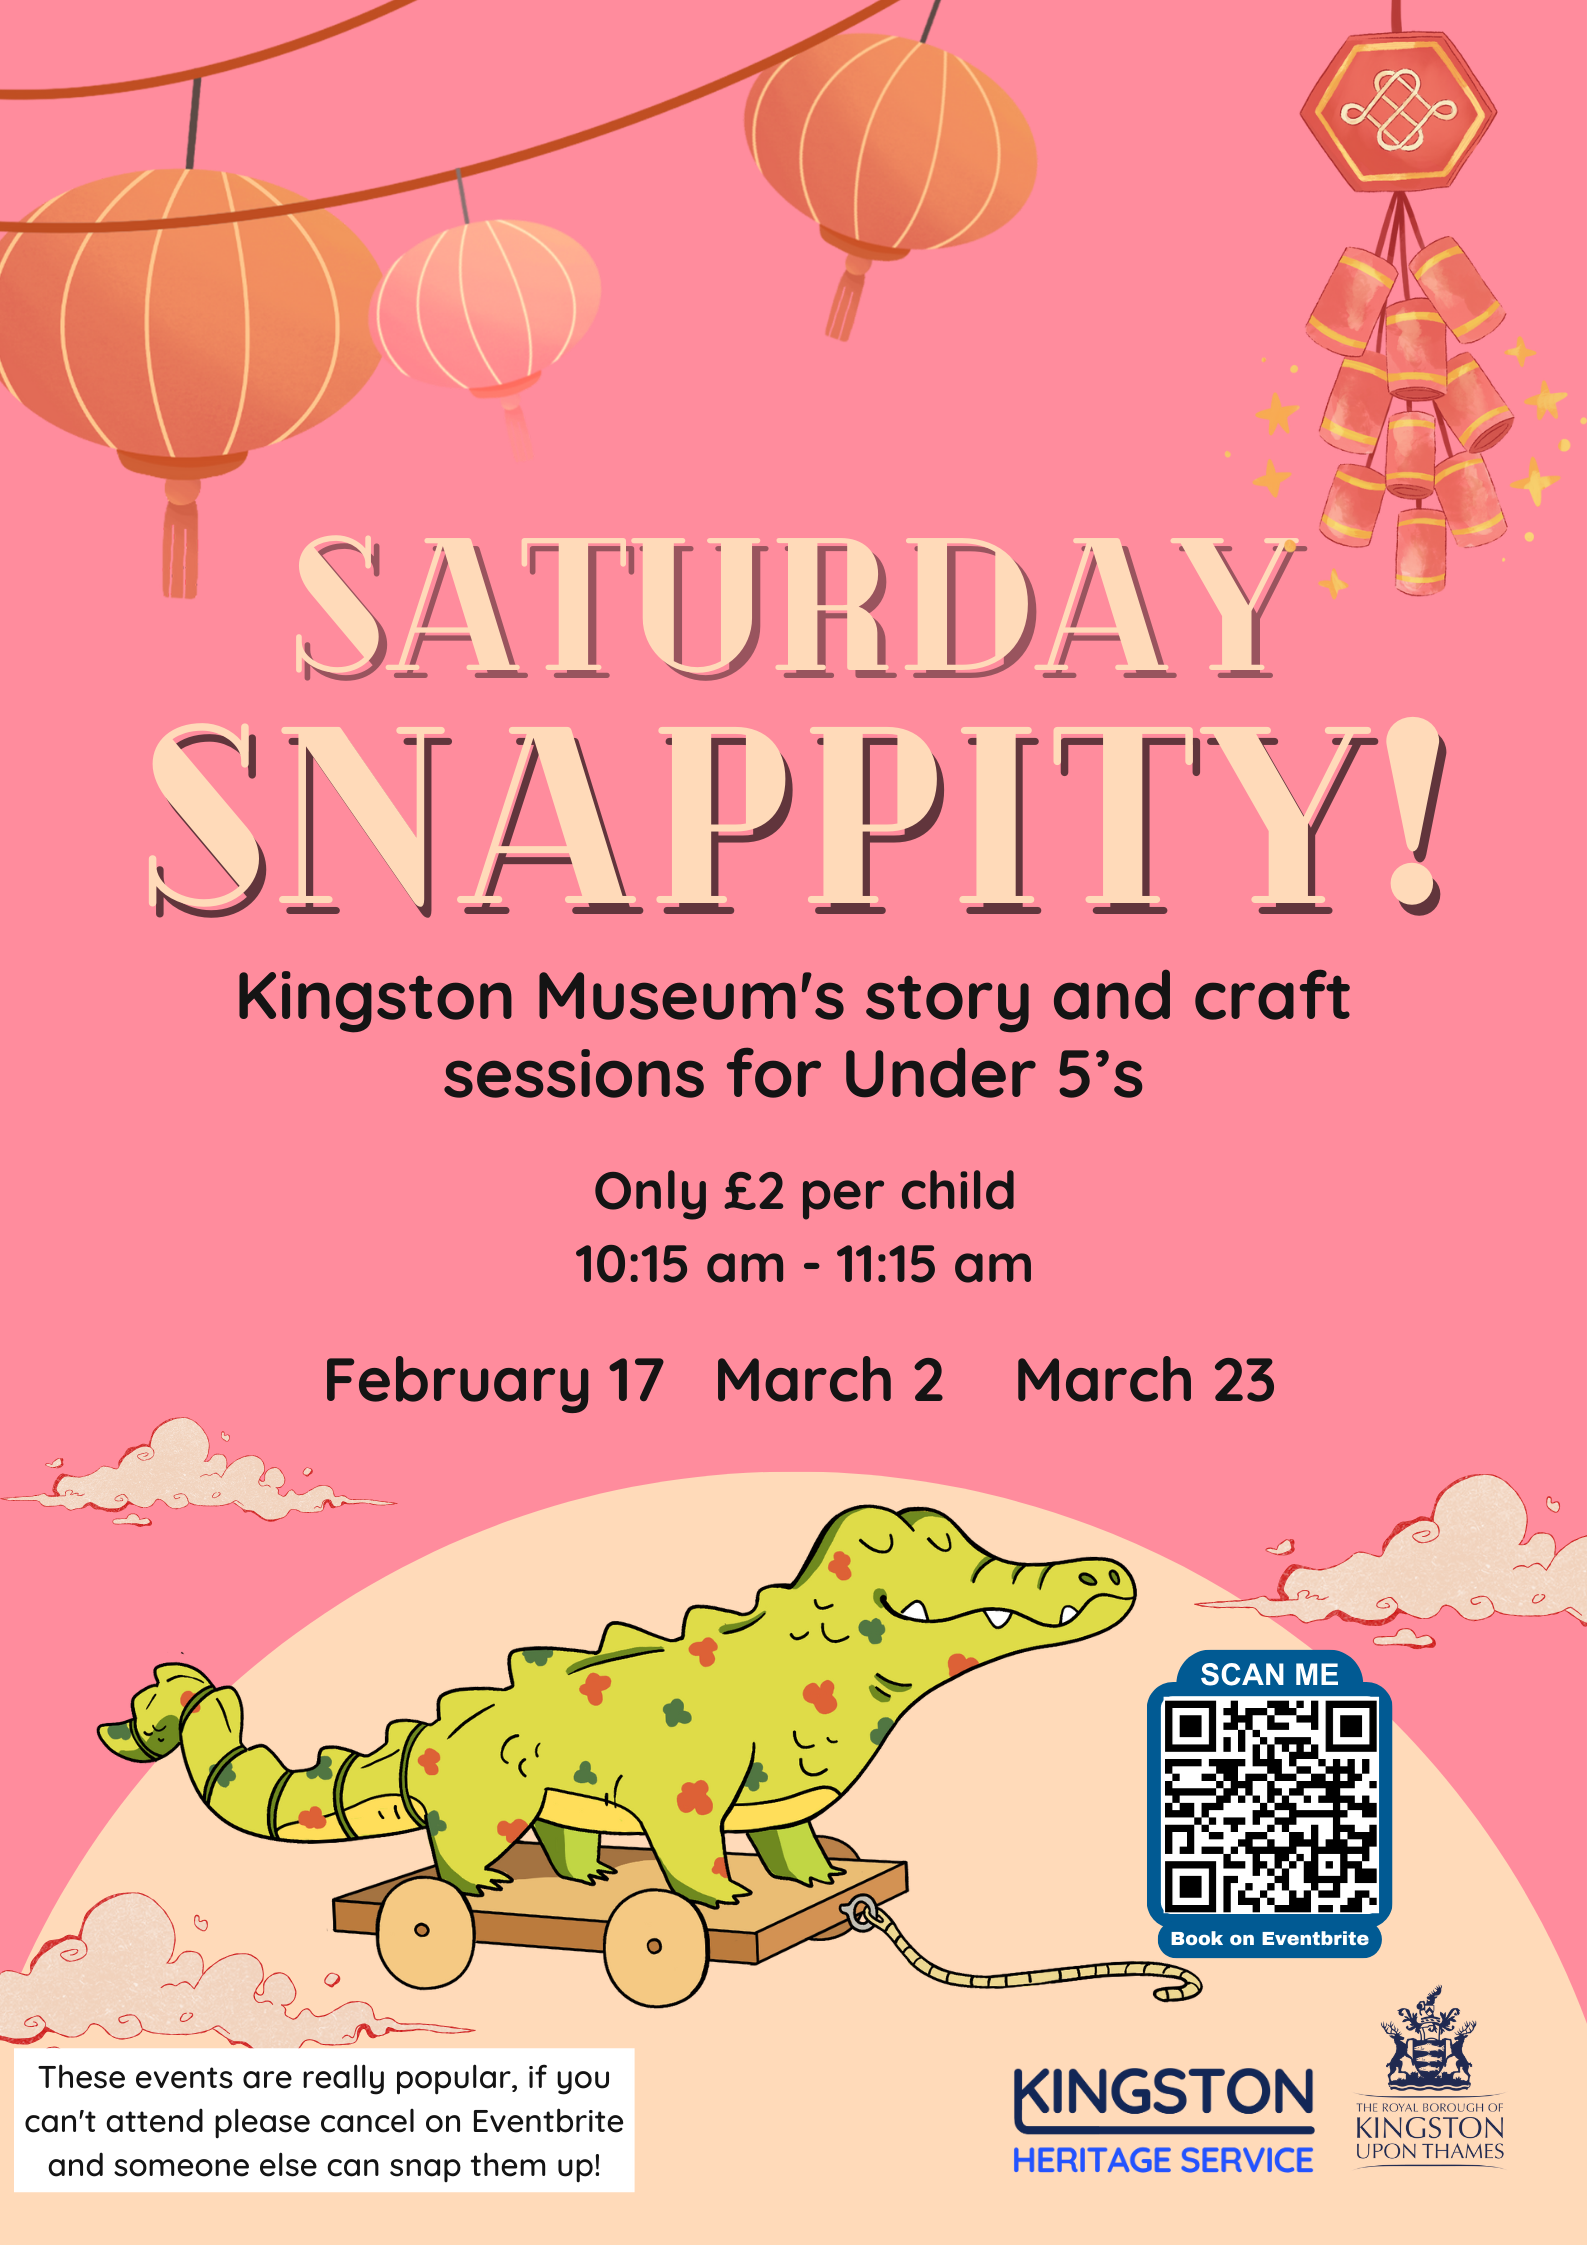 Snappity cny and beyond